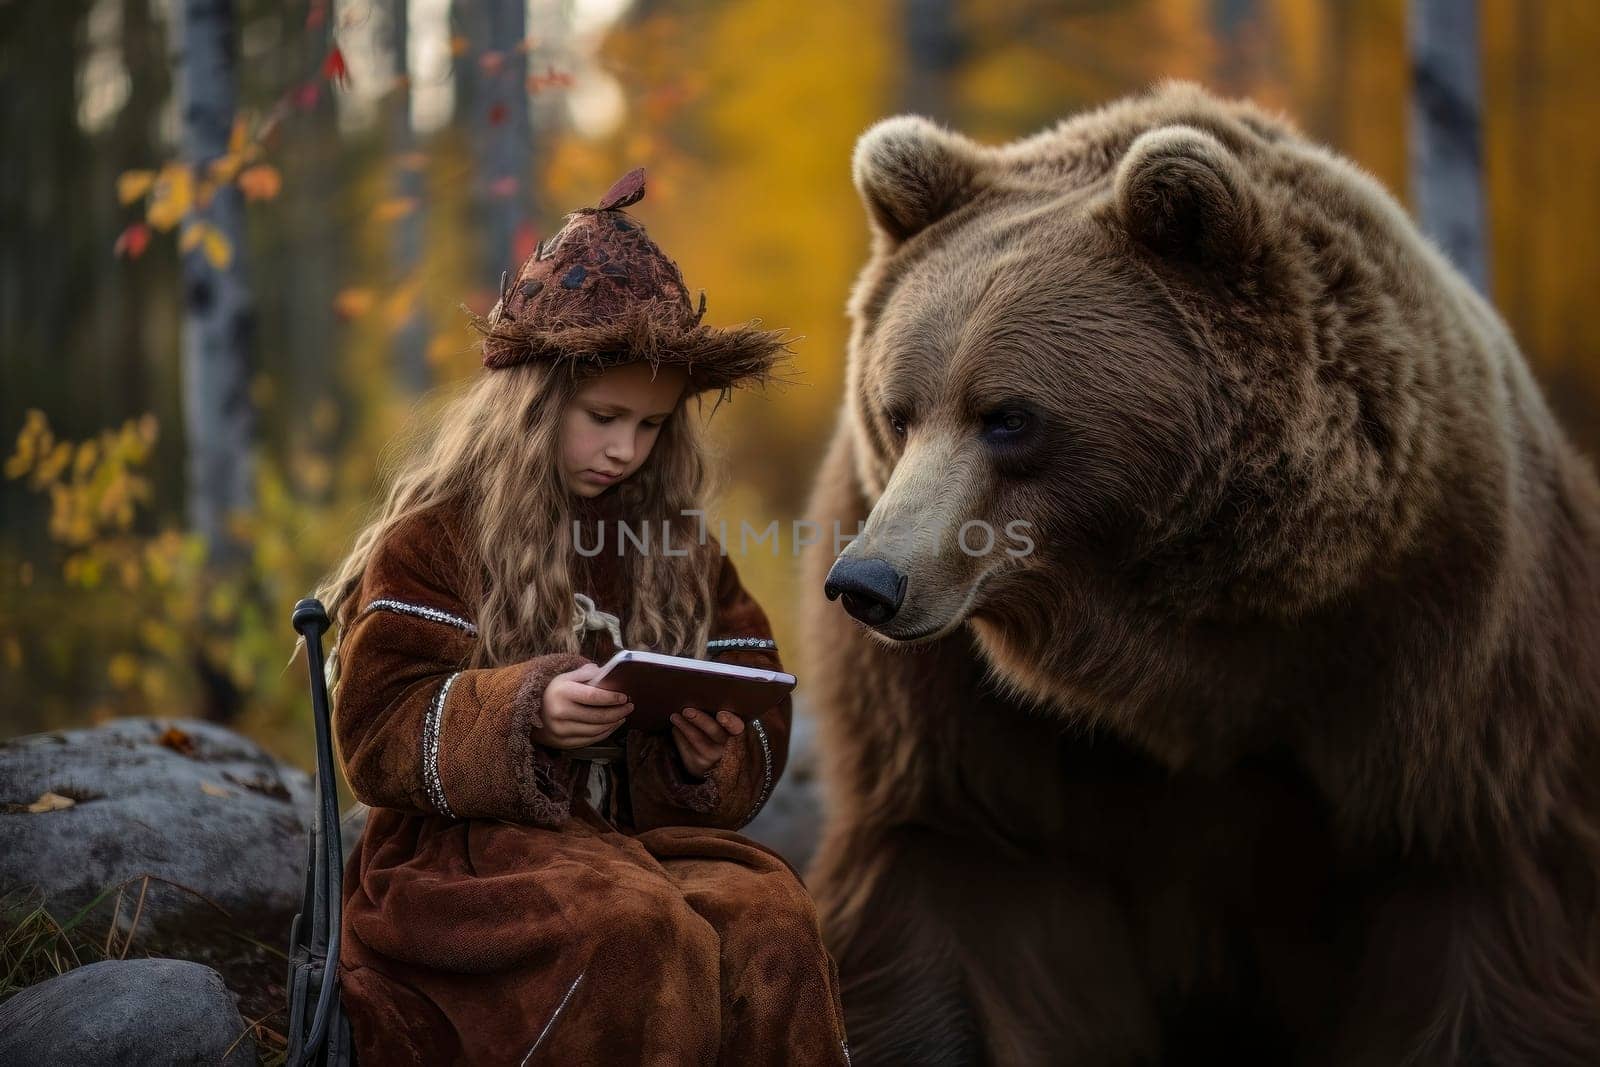 Lost in the Digital Tale: Little Girl with Fairy Bear Using Smartphone by pippocarlot